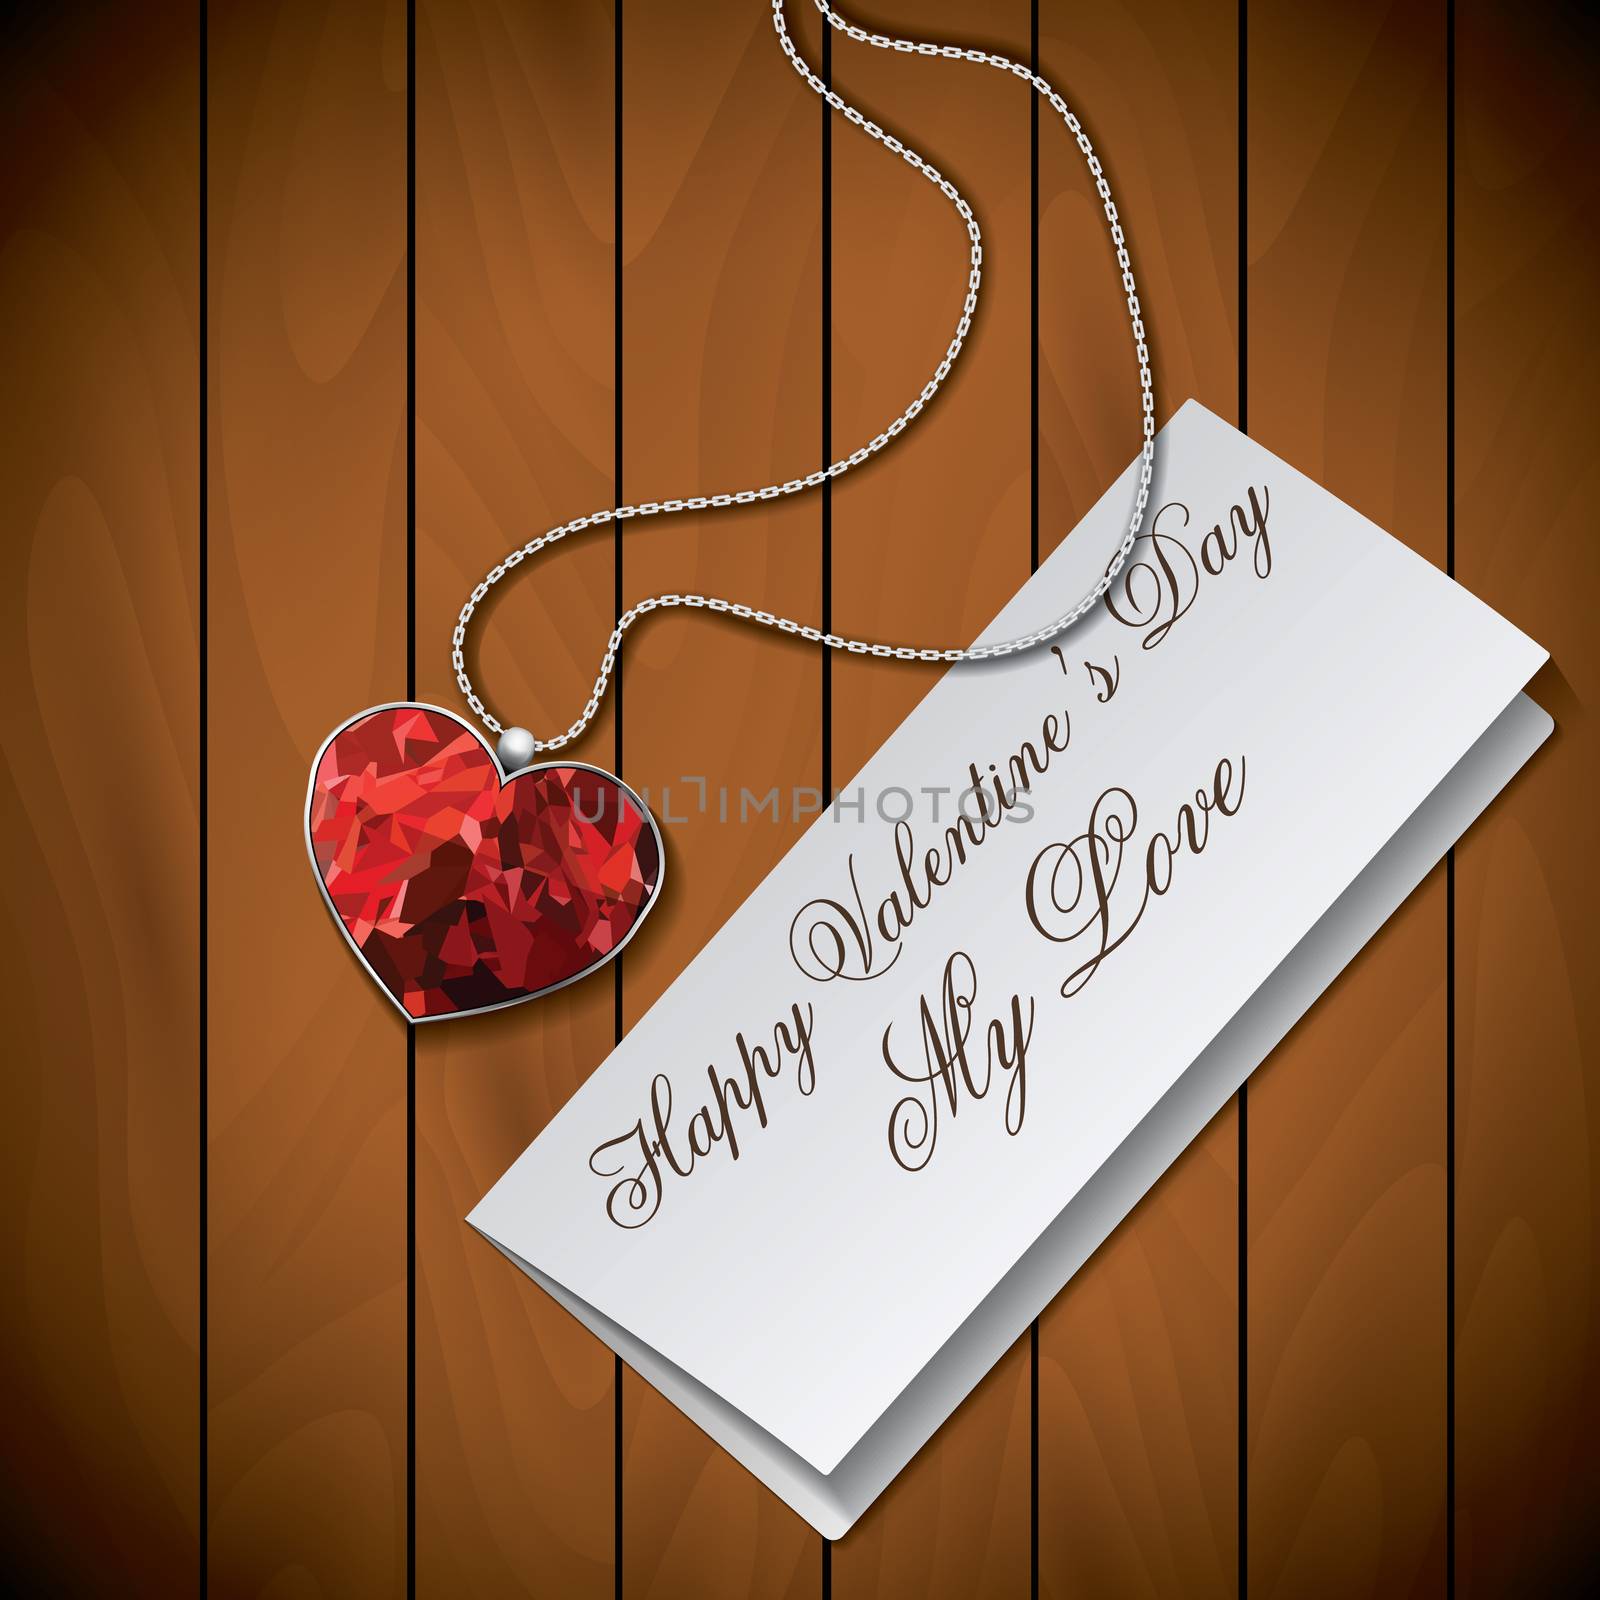 Letter with pendant on wood background by Lemon_workshop